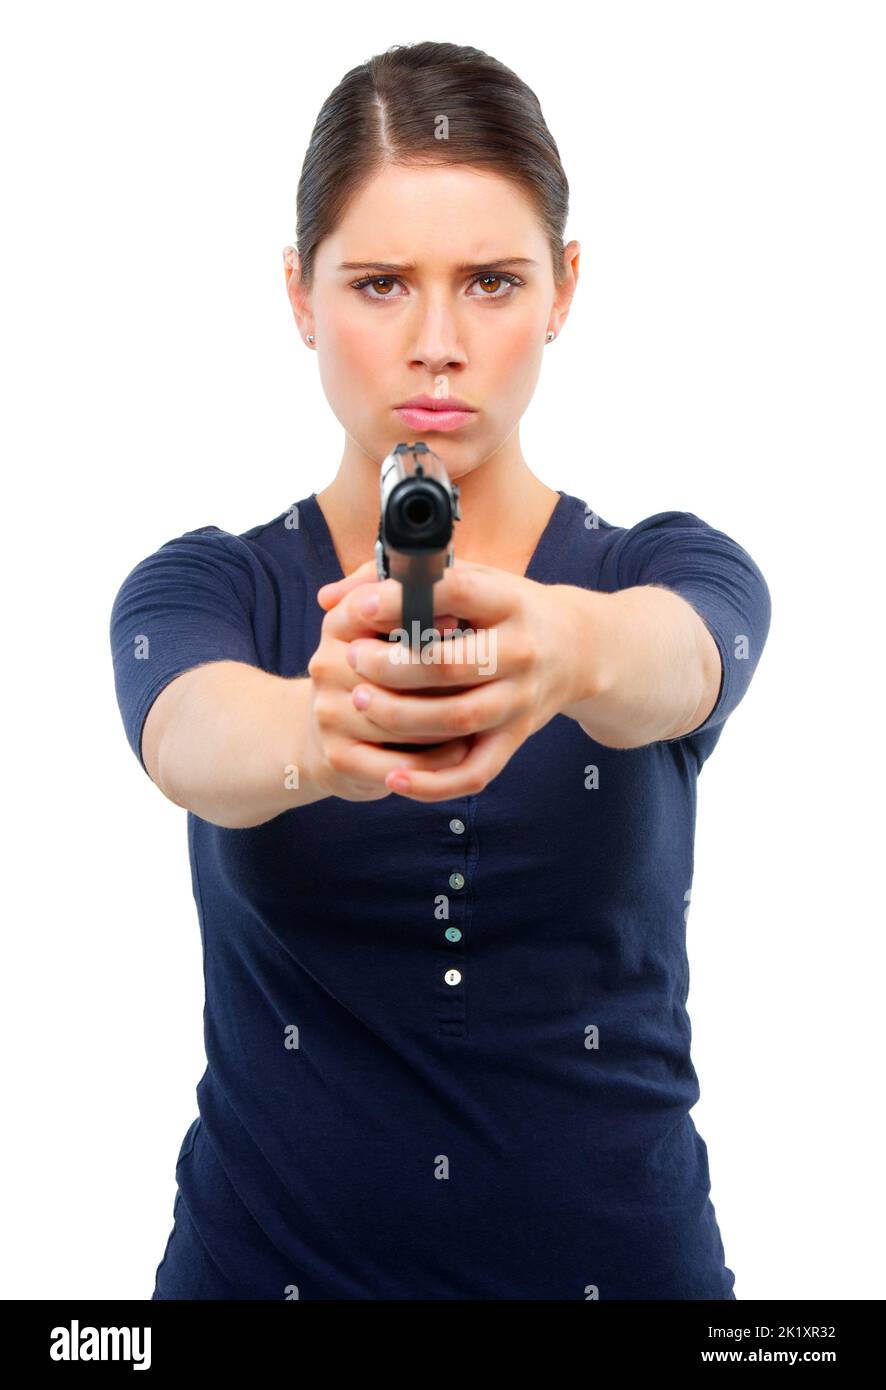 Take one more step...I dare you. Studio shot of a hostile woman pointing a gun at you isolated on white. Stock Photo